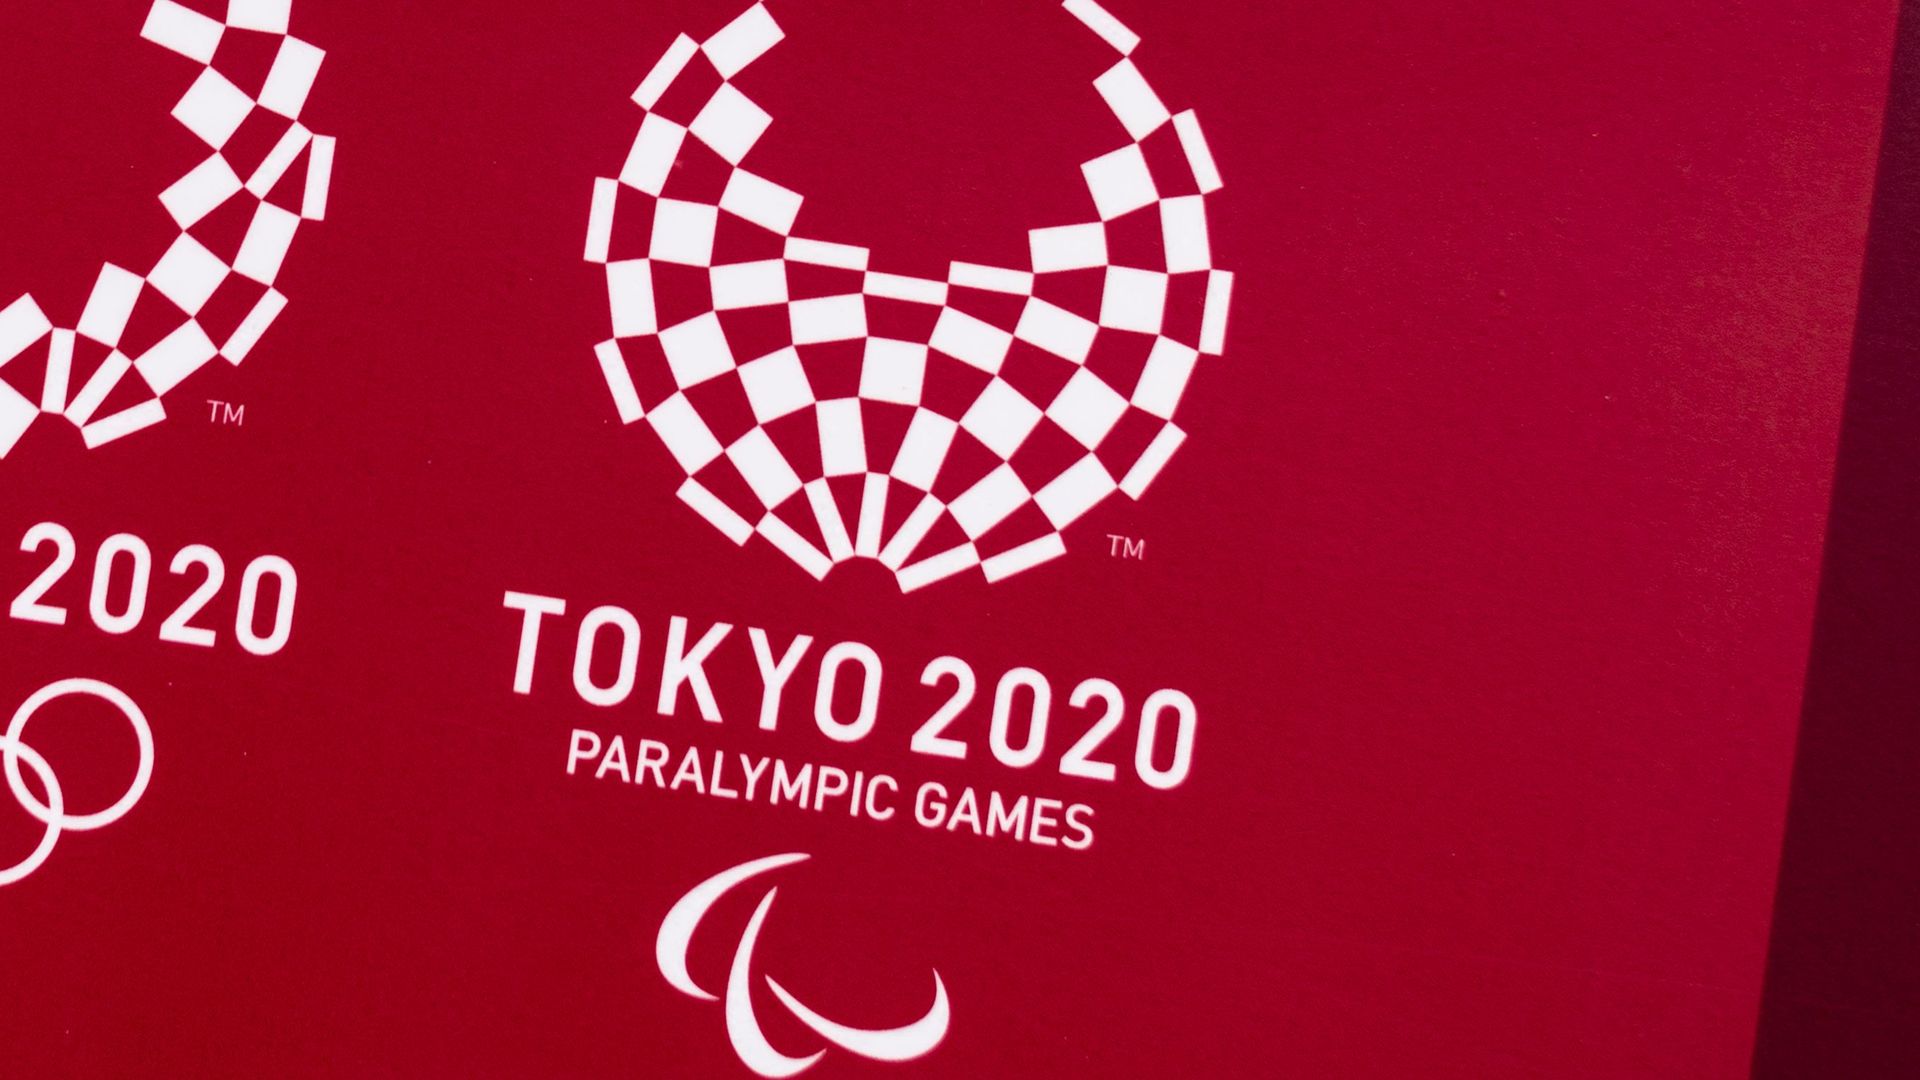 This picture shows the logos of the Tokyo 2020 Olympic and Paralympic Games in Tokyo on March 20,